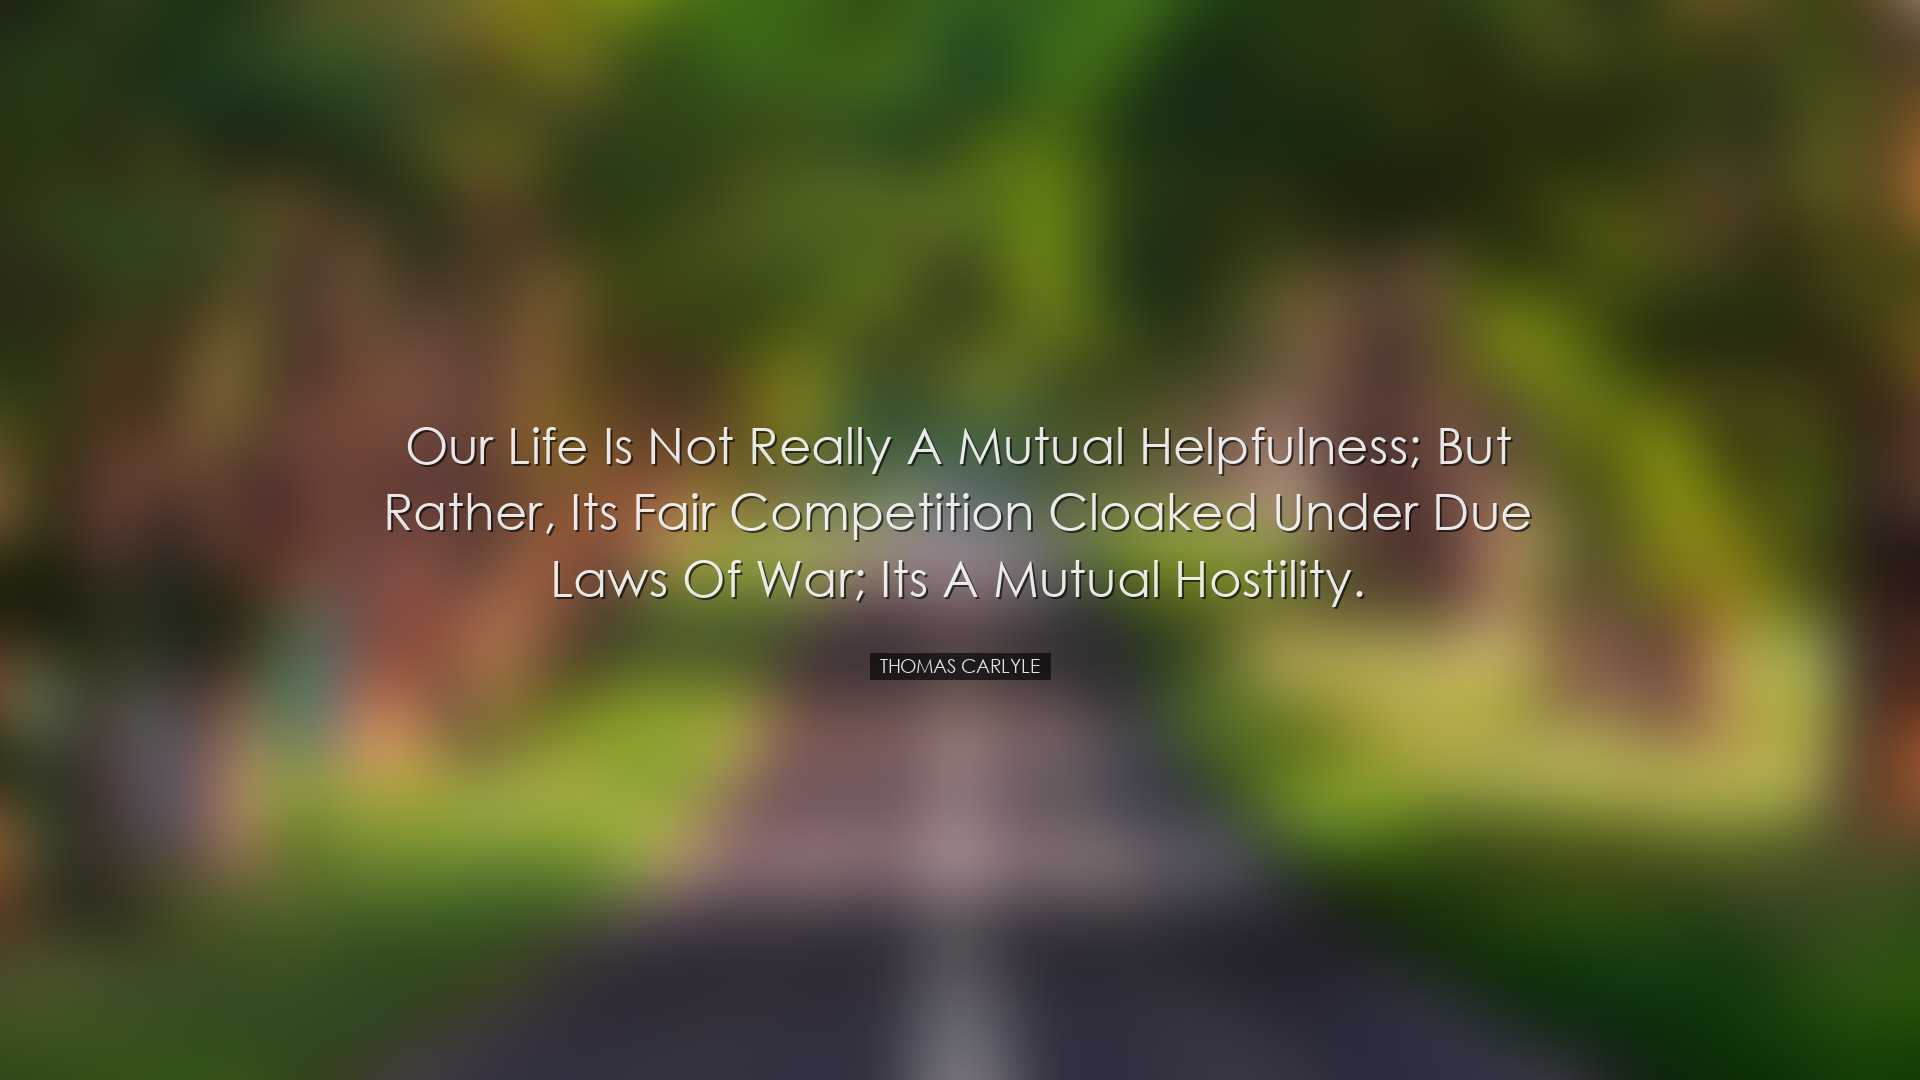 Our life is not really a mutual helpfulness; but rather, its fair